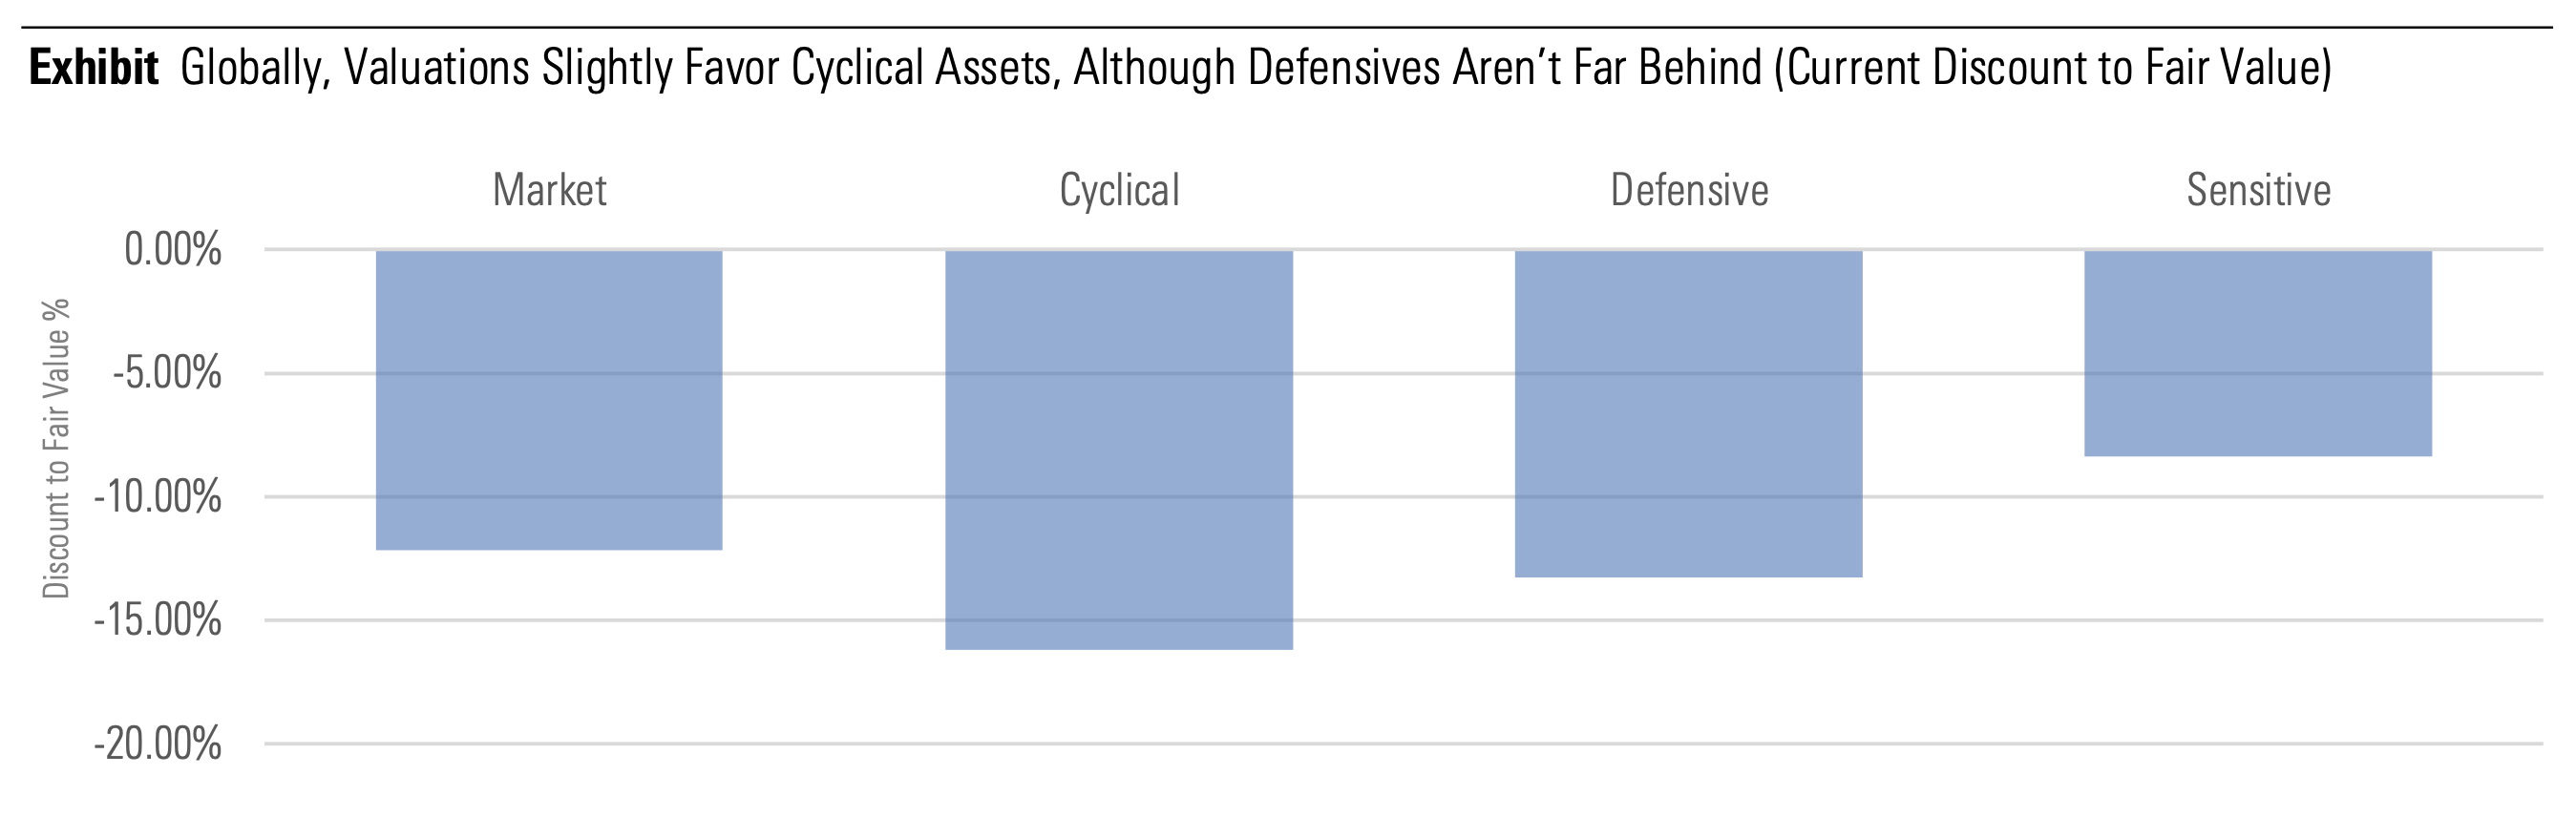 Chart comparing valuations for cyclical, defensive, and sensitive sectors.